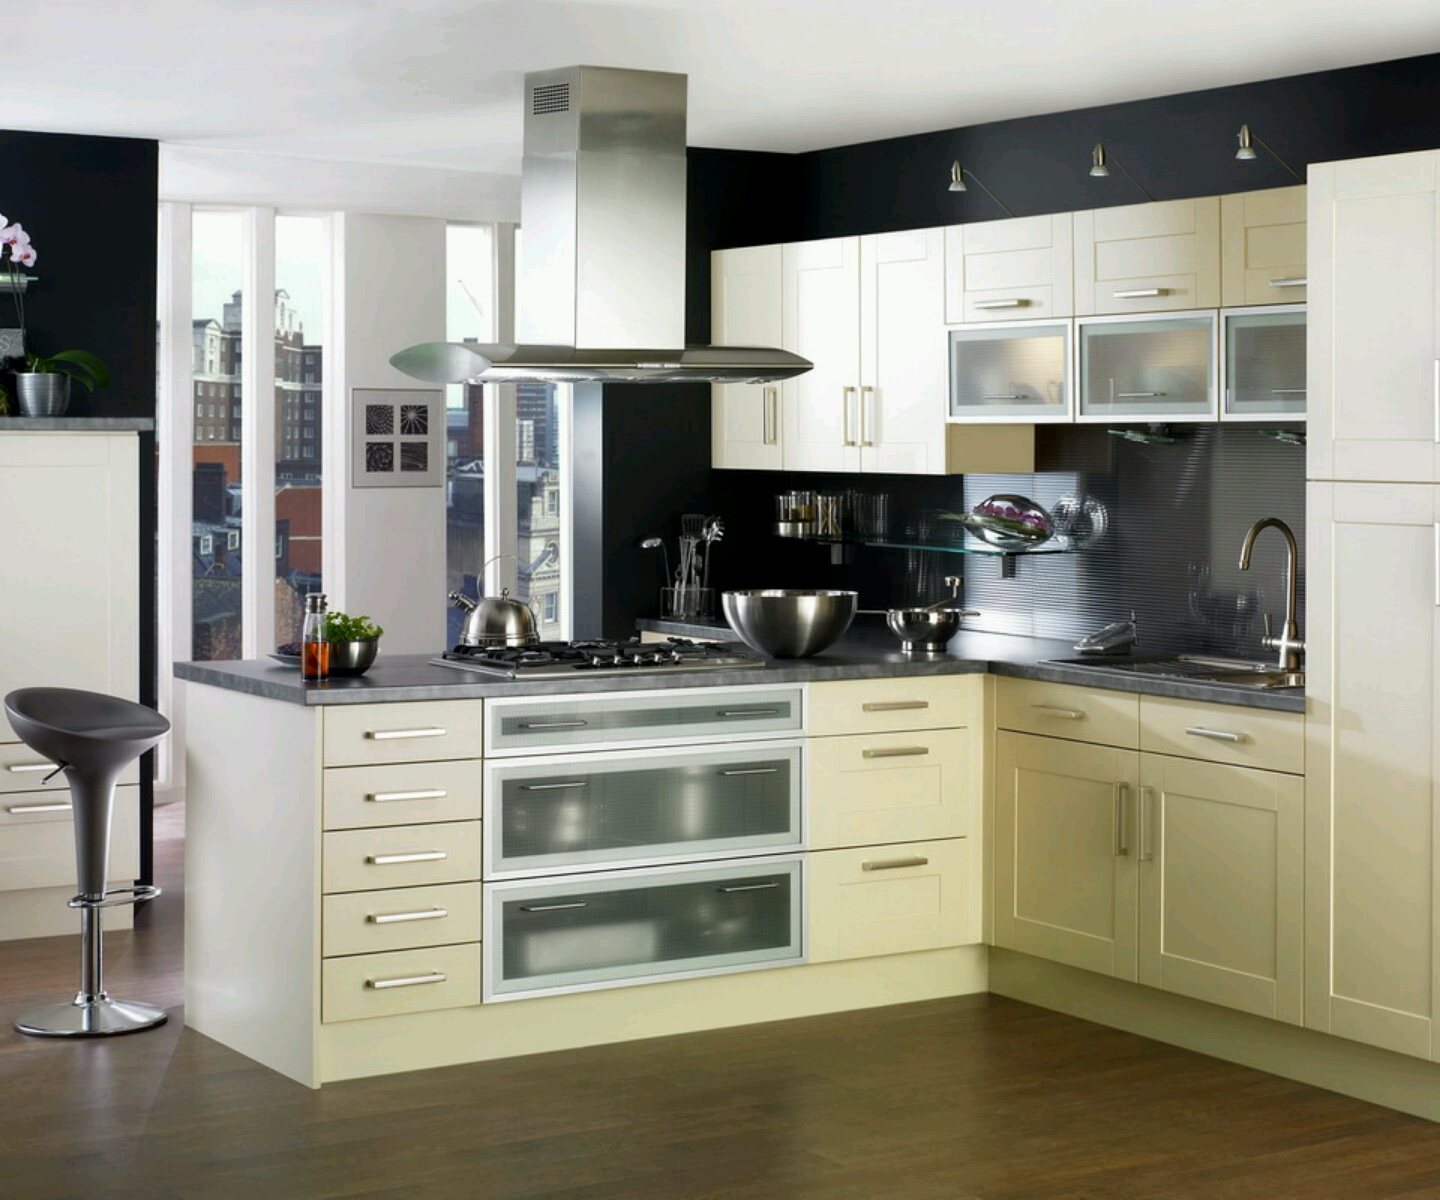 New Age Contemporary Kitchens